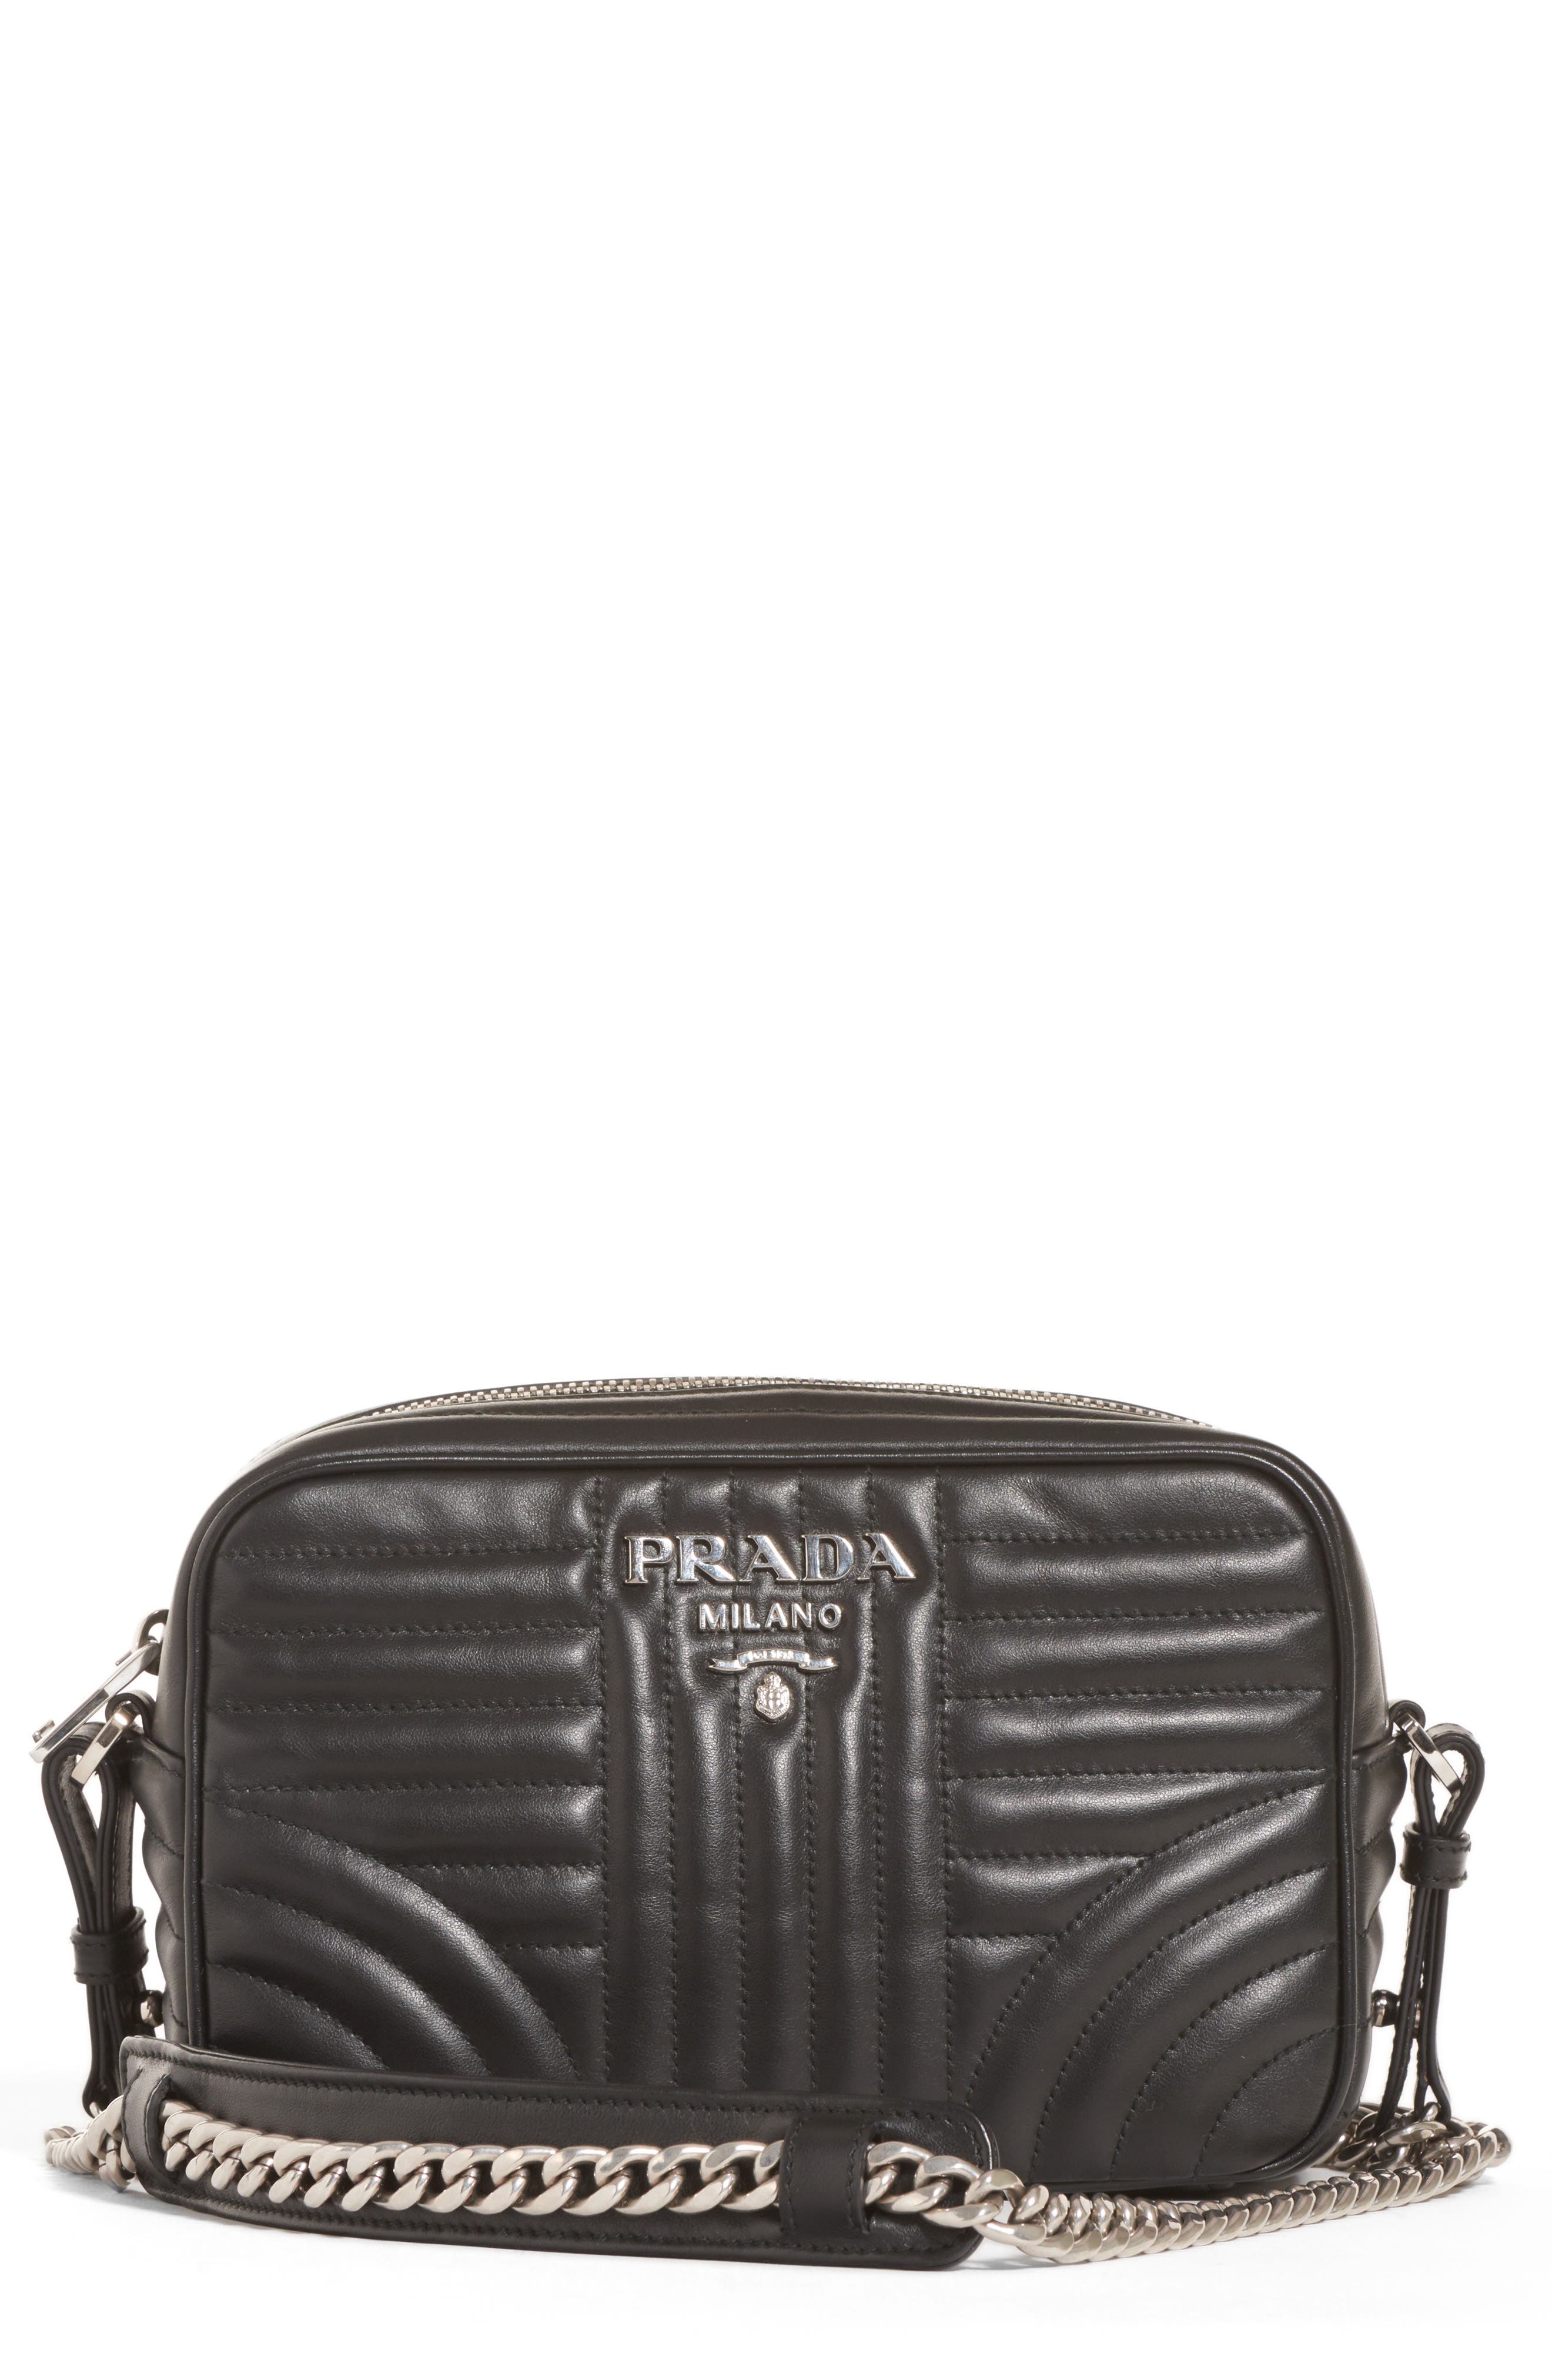 prada quilted leather camera bag